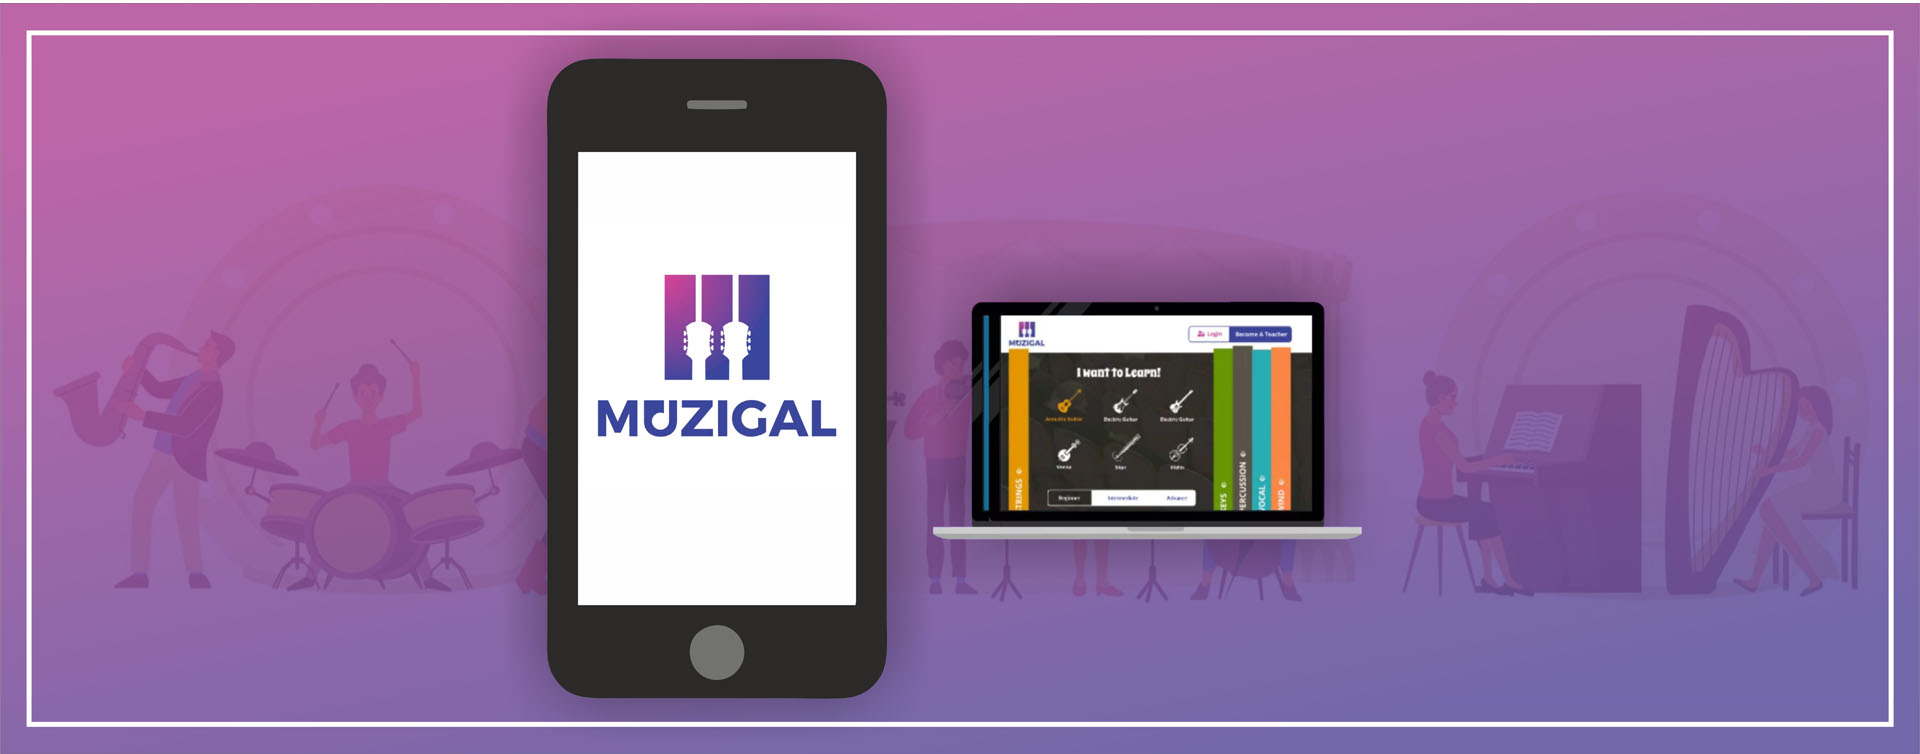 Muzigal: A Convergence of Music, Technology and Human Ingenuity